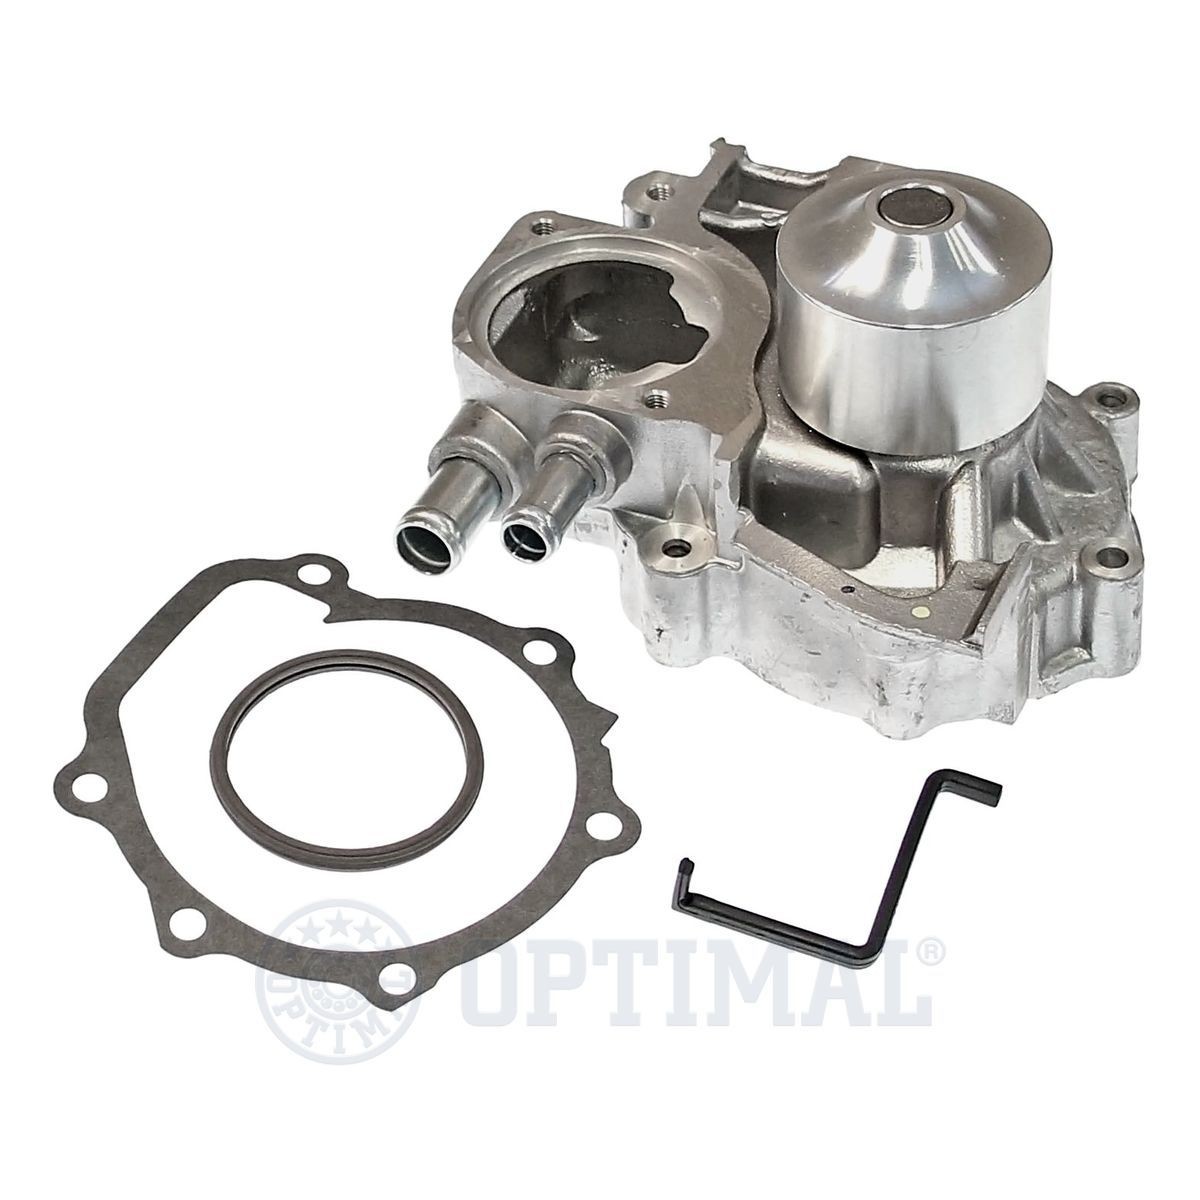 OPTIMAL AQ-2234 Water pump with gaskets/seals, Mechanical